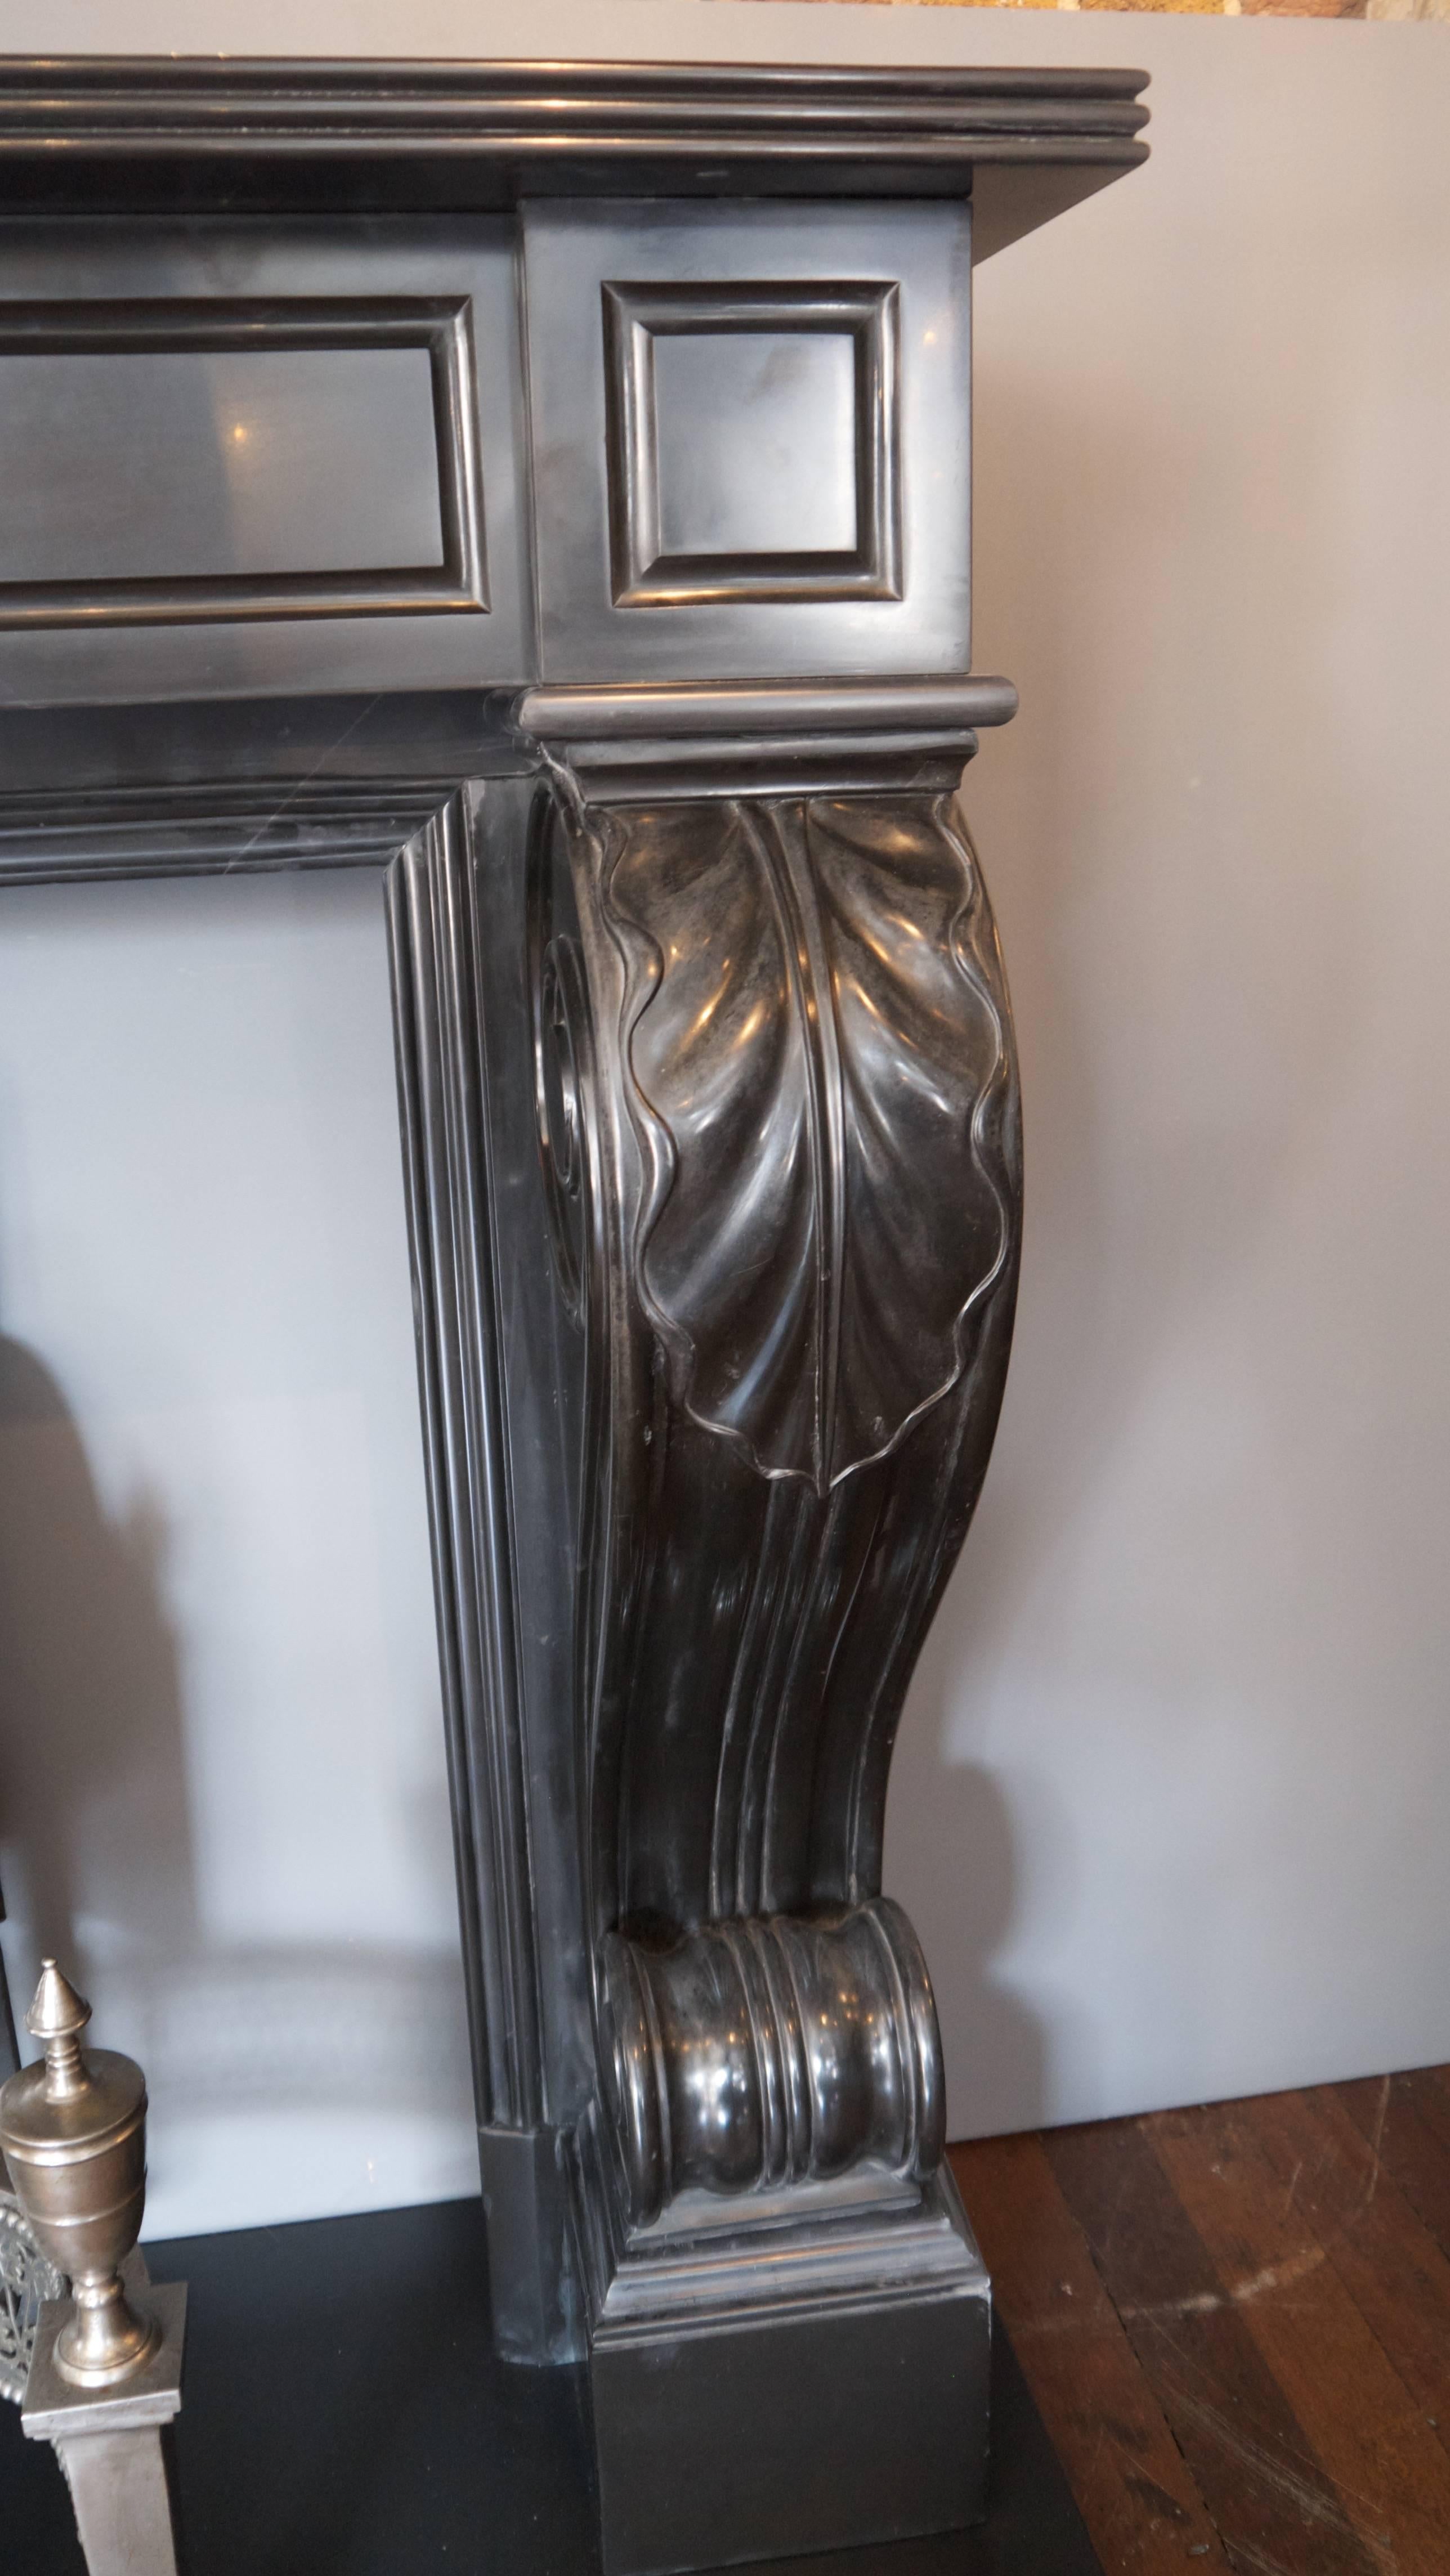 Early 19th century Regency neoclassical black marble surround. Opening 38 W x 31.75 H.